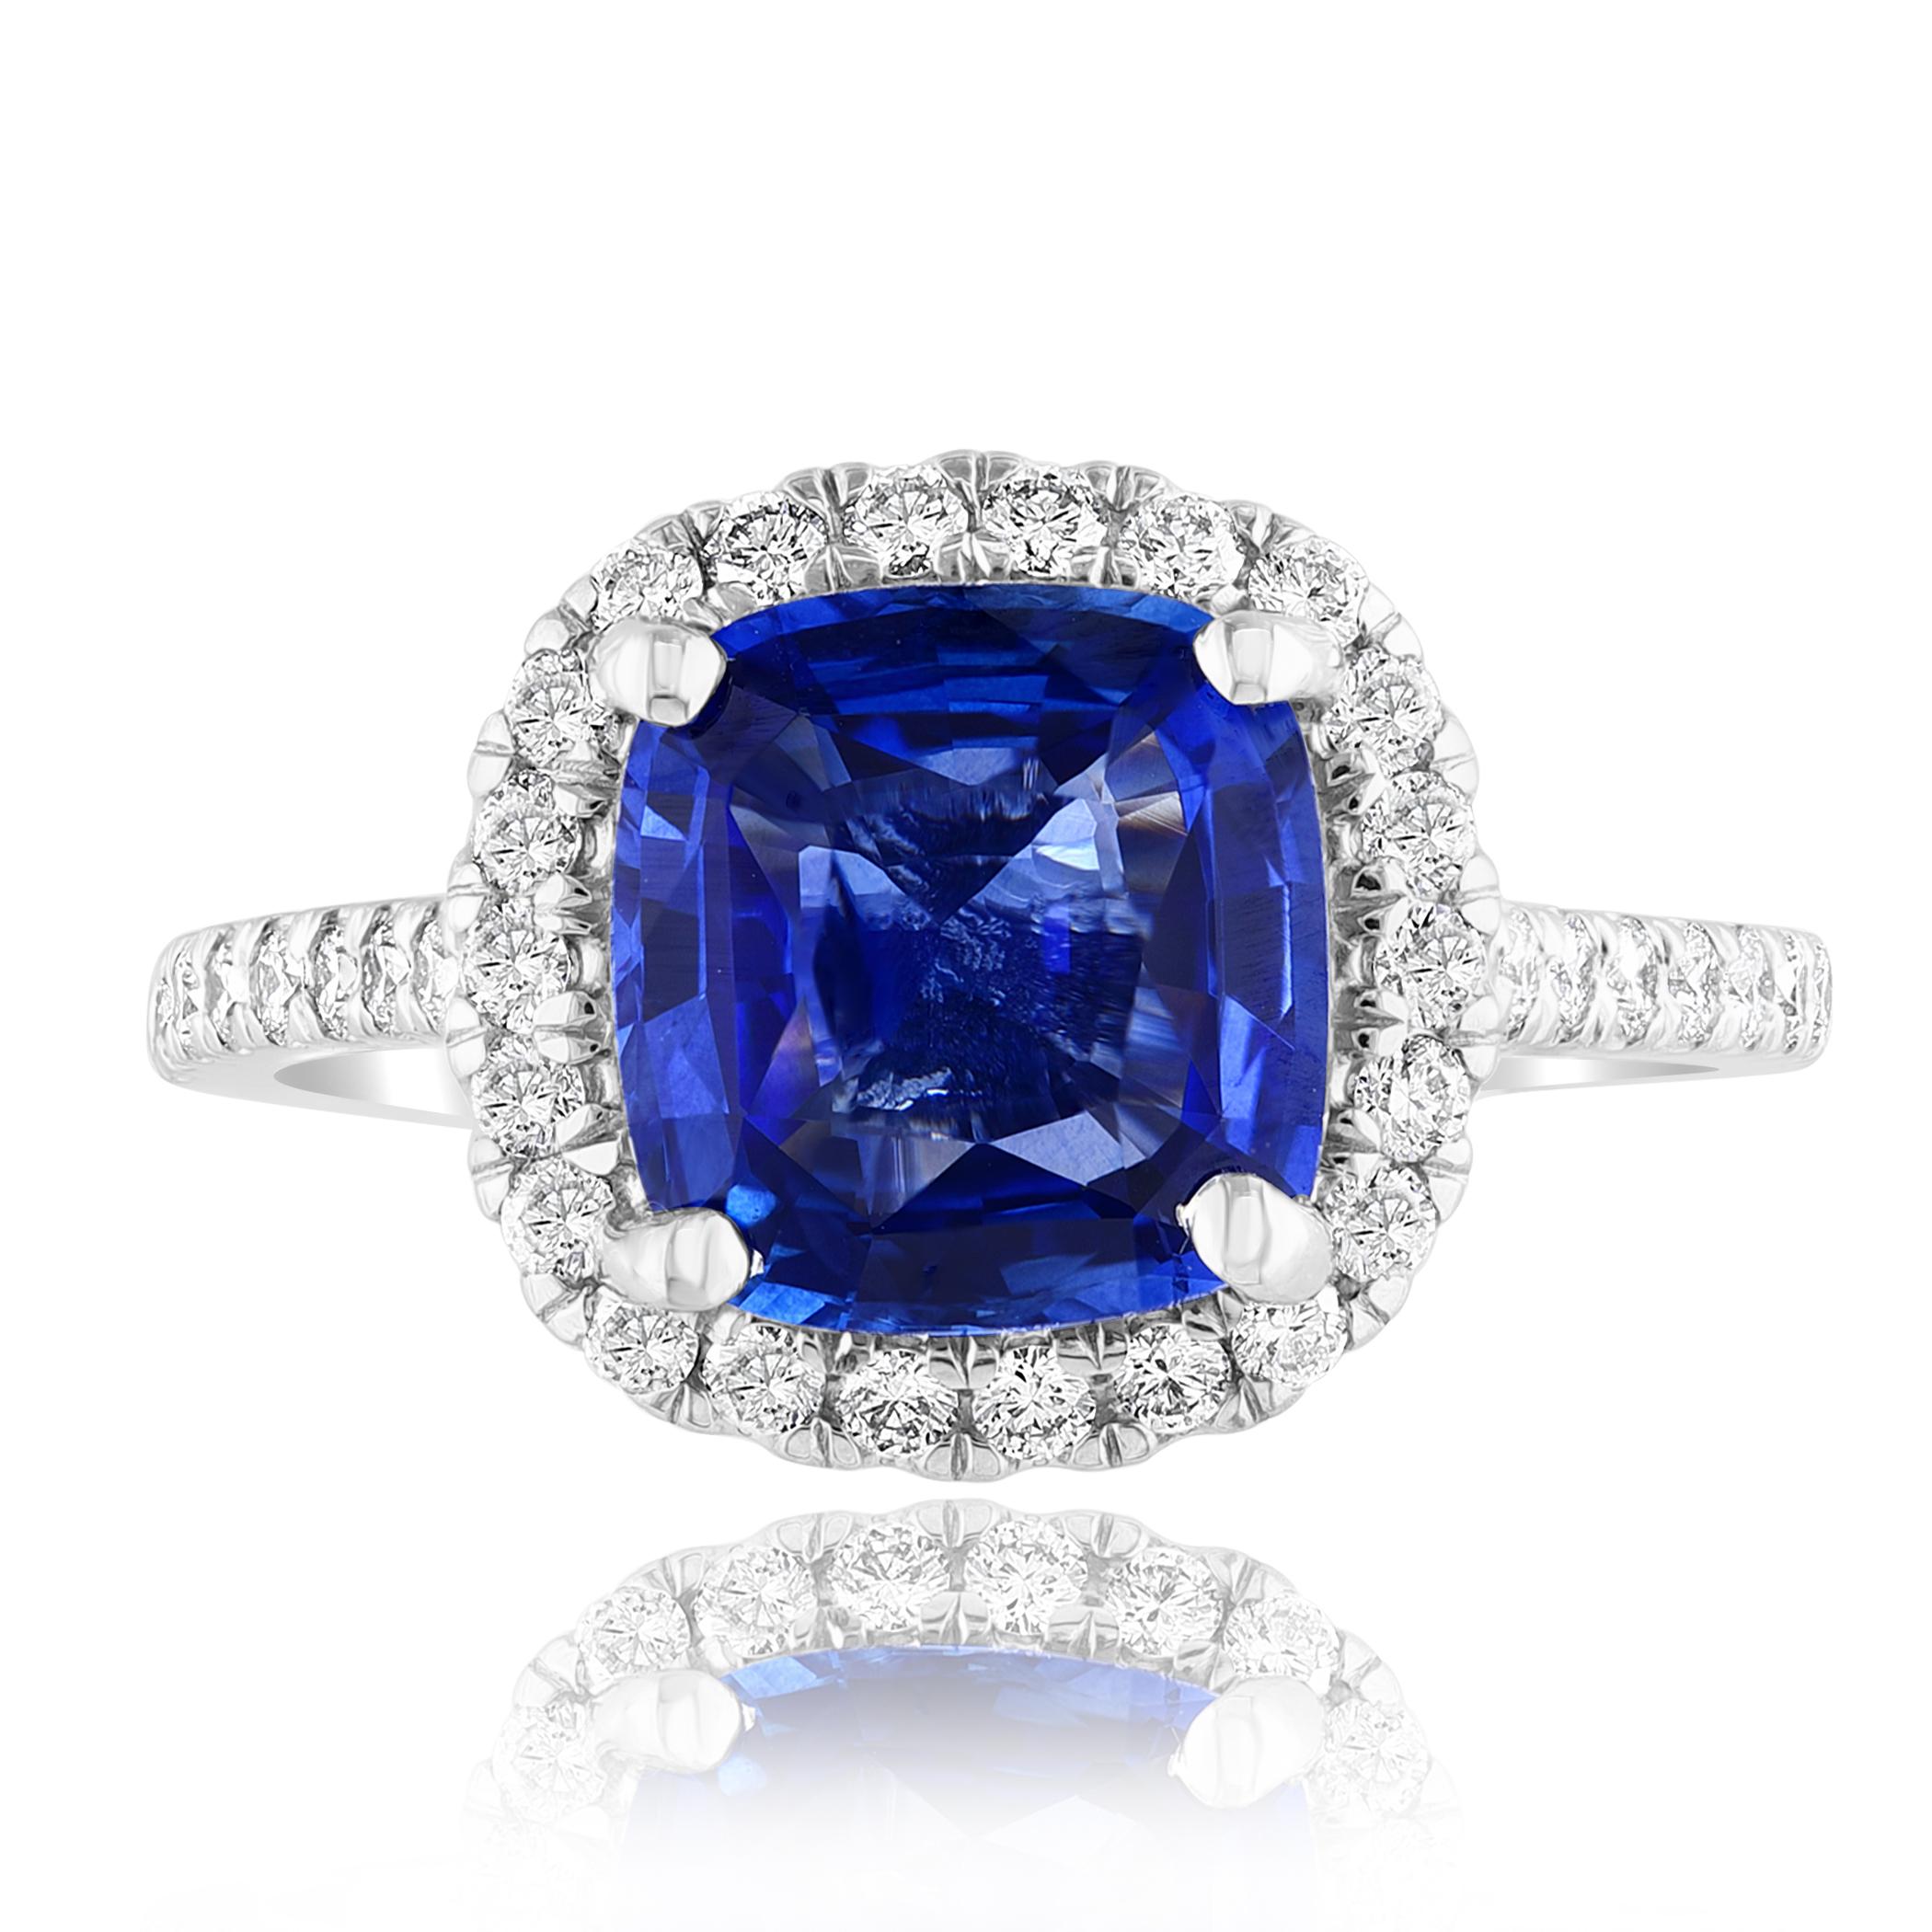 A simple classic ring showcasing a vibrant 3.07-carat cushion cut blue sapphire, surrounded by 
0.50 carats of 40 accent round diamonds. Made in Platinum.

Style is available in different price ranges. Prices are based on your selection of the 4C’s